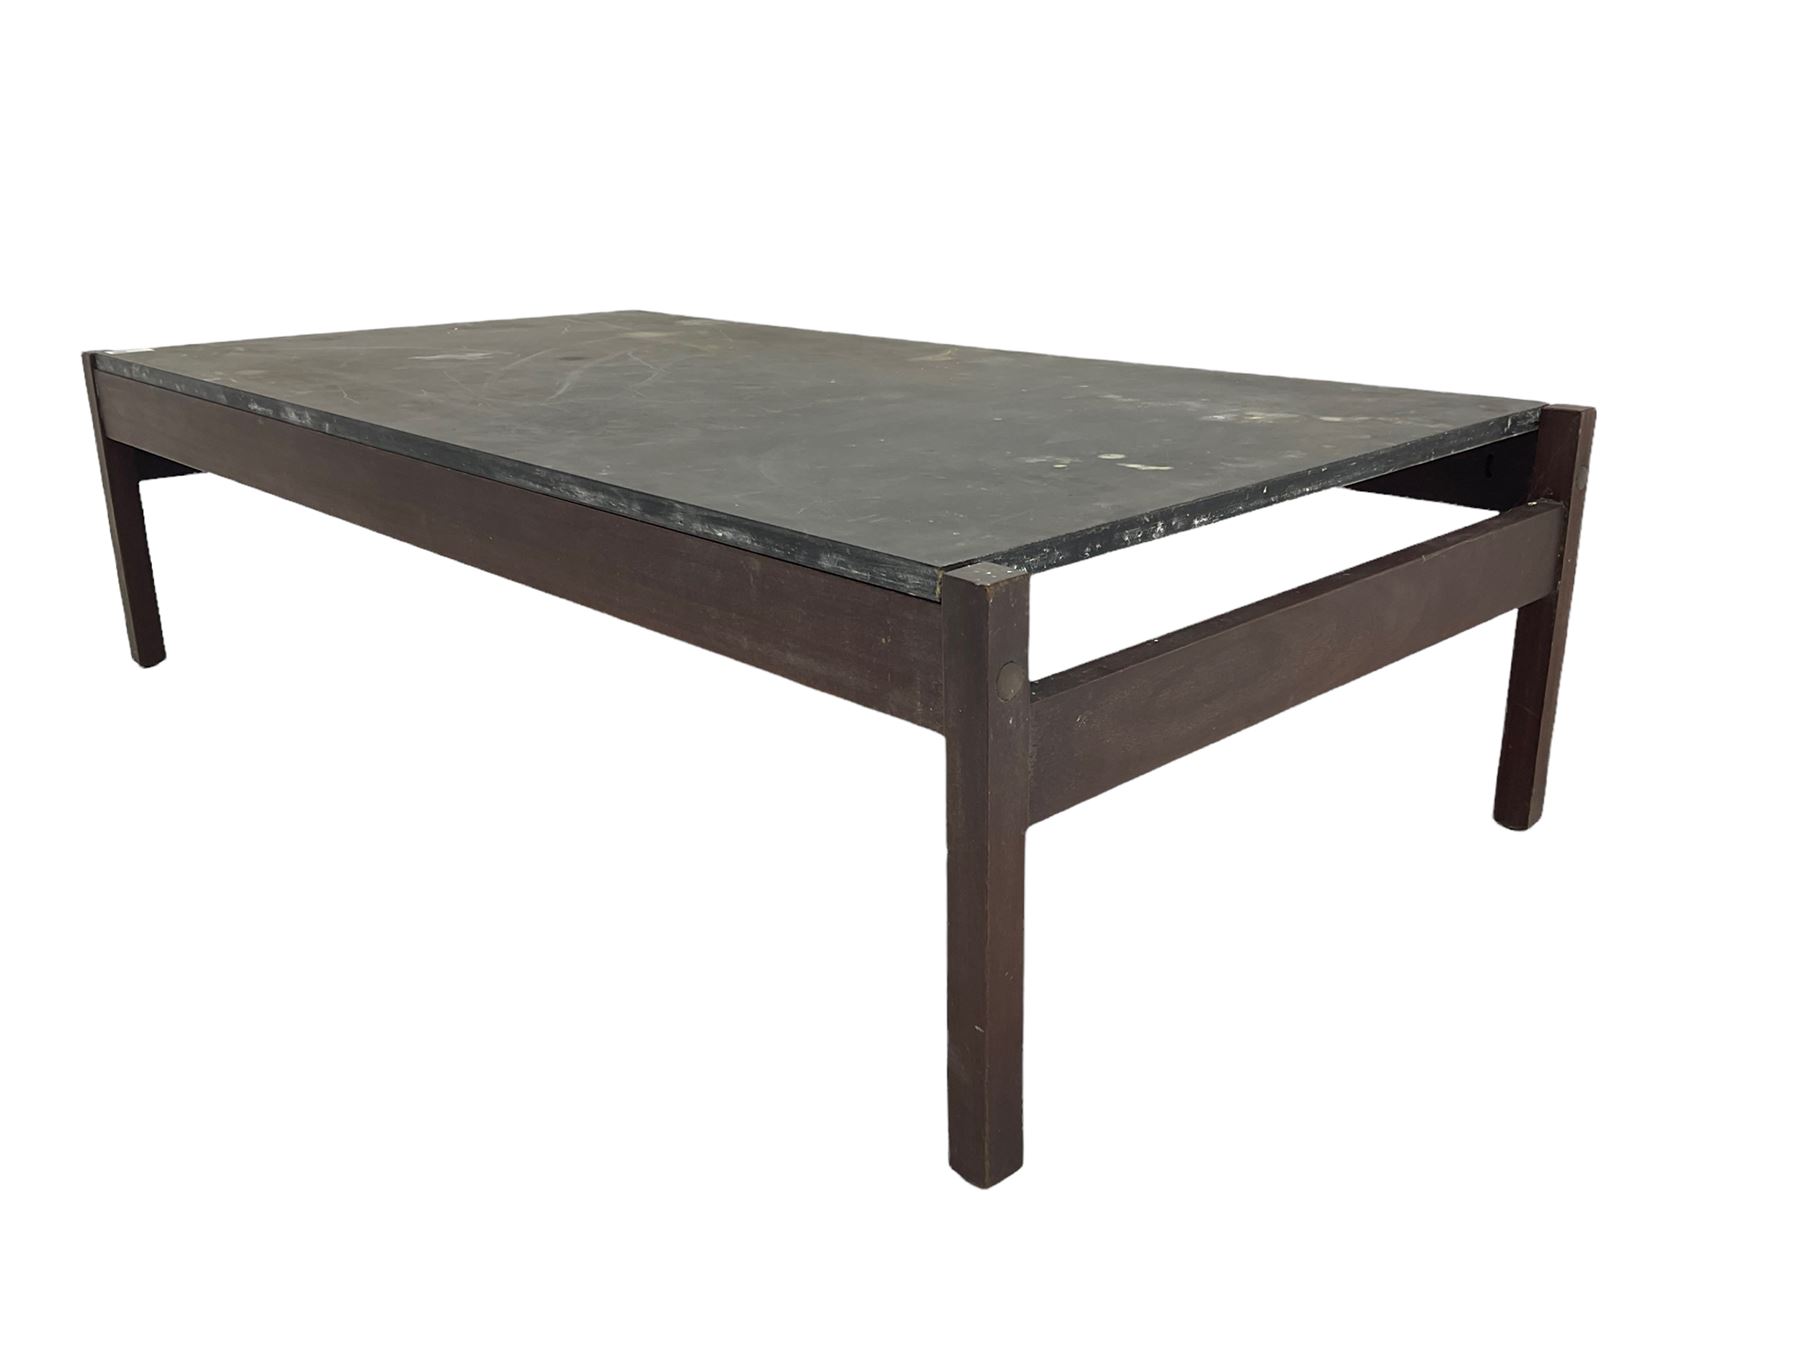 Mid-20th century rectangular teak coffee table with black lacquered top (117cm x 61cm - Image 5 of 8